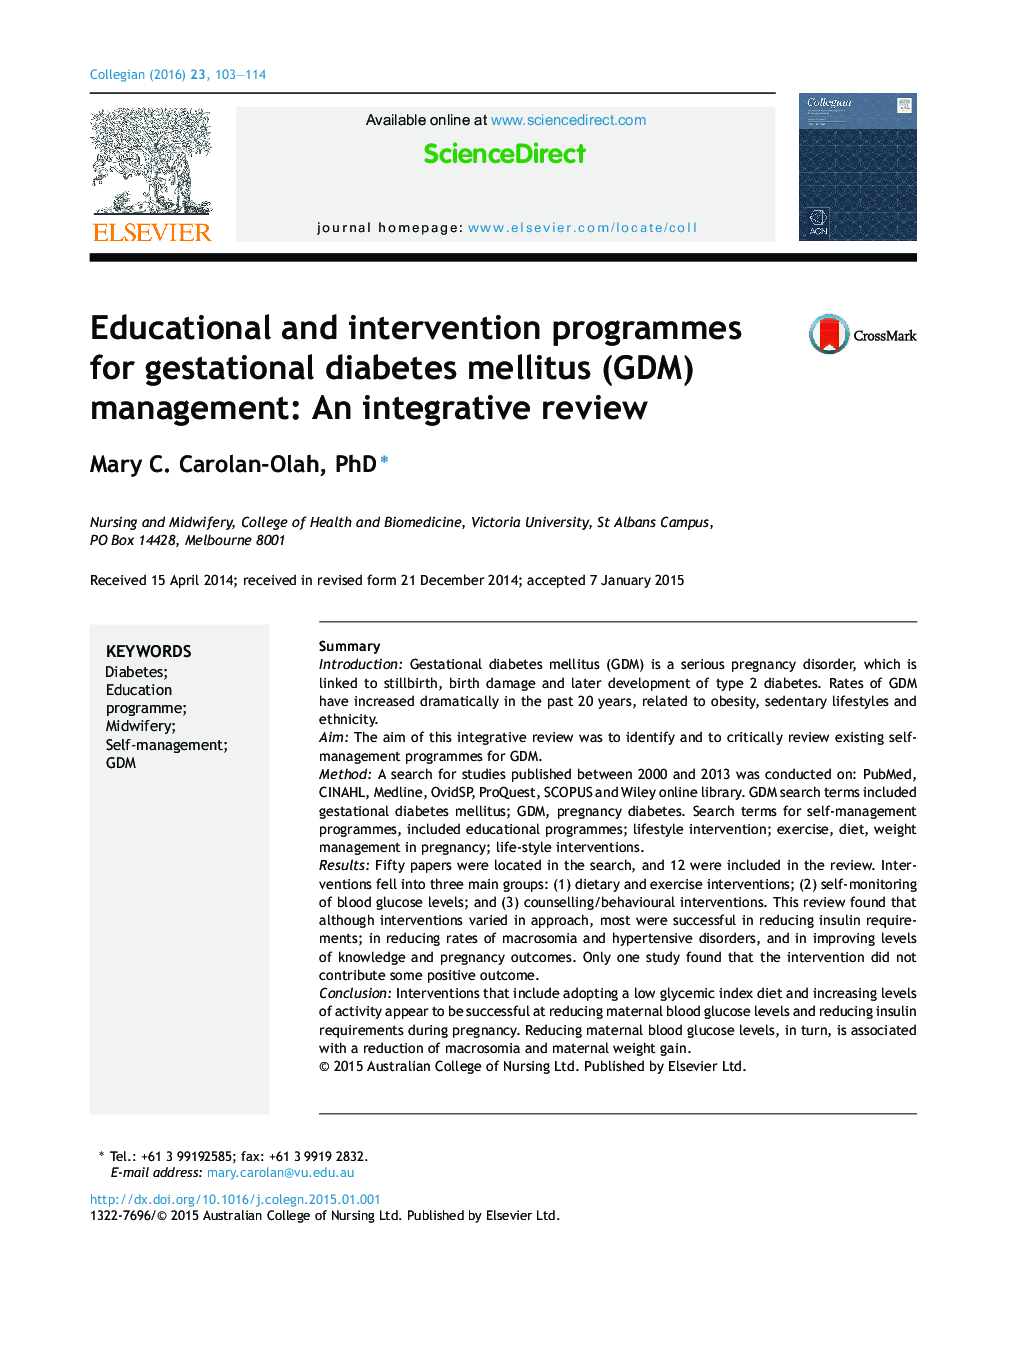 Educational and intervention programmes for gestational diabetes mellitus (GDM) management: An integrative review